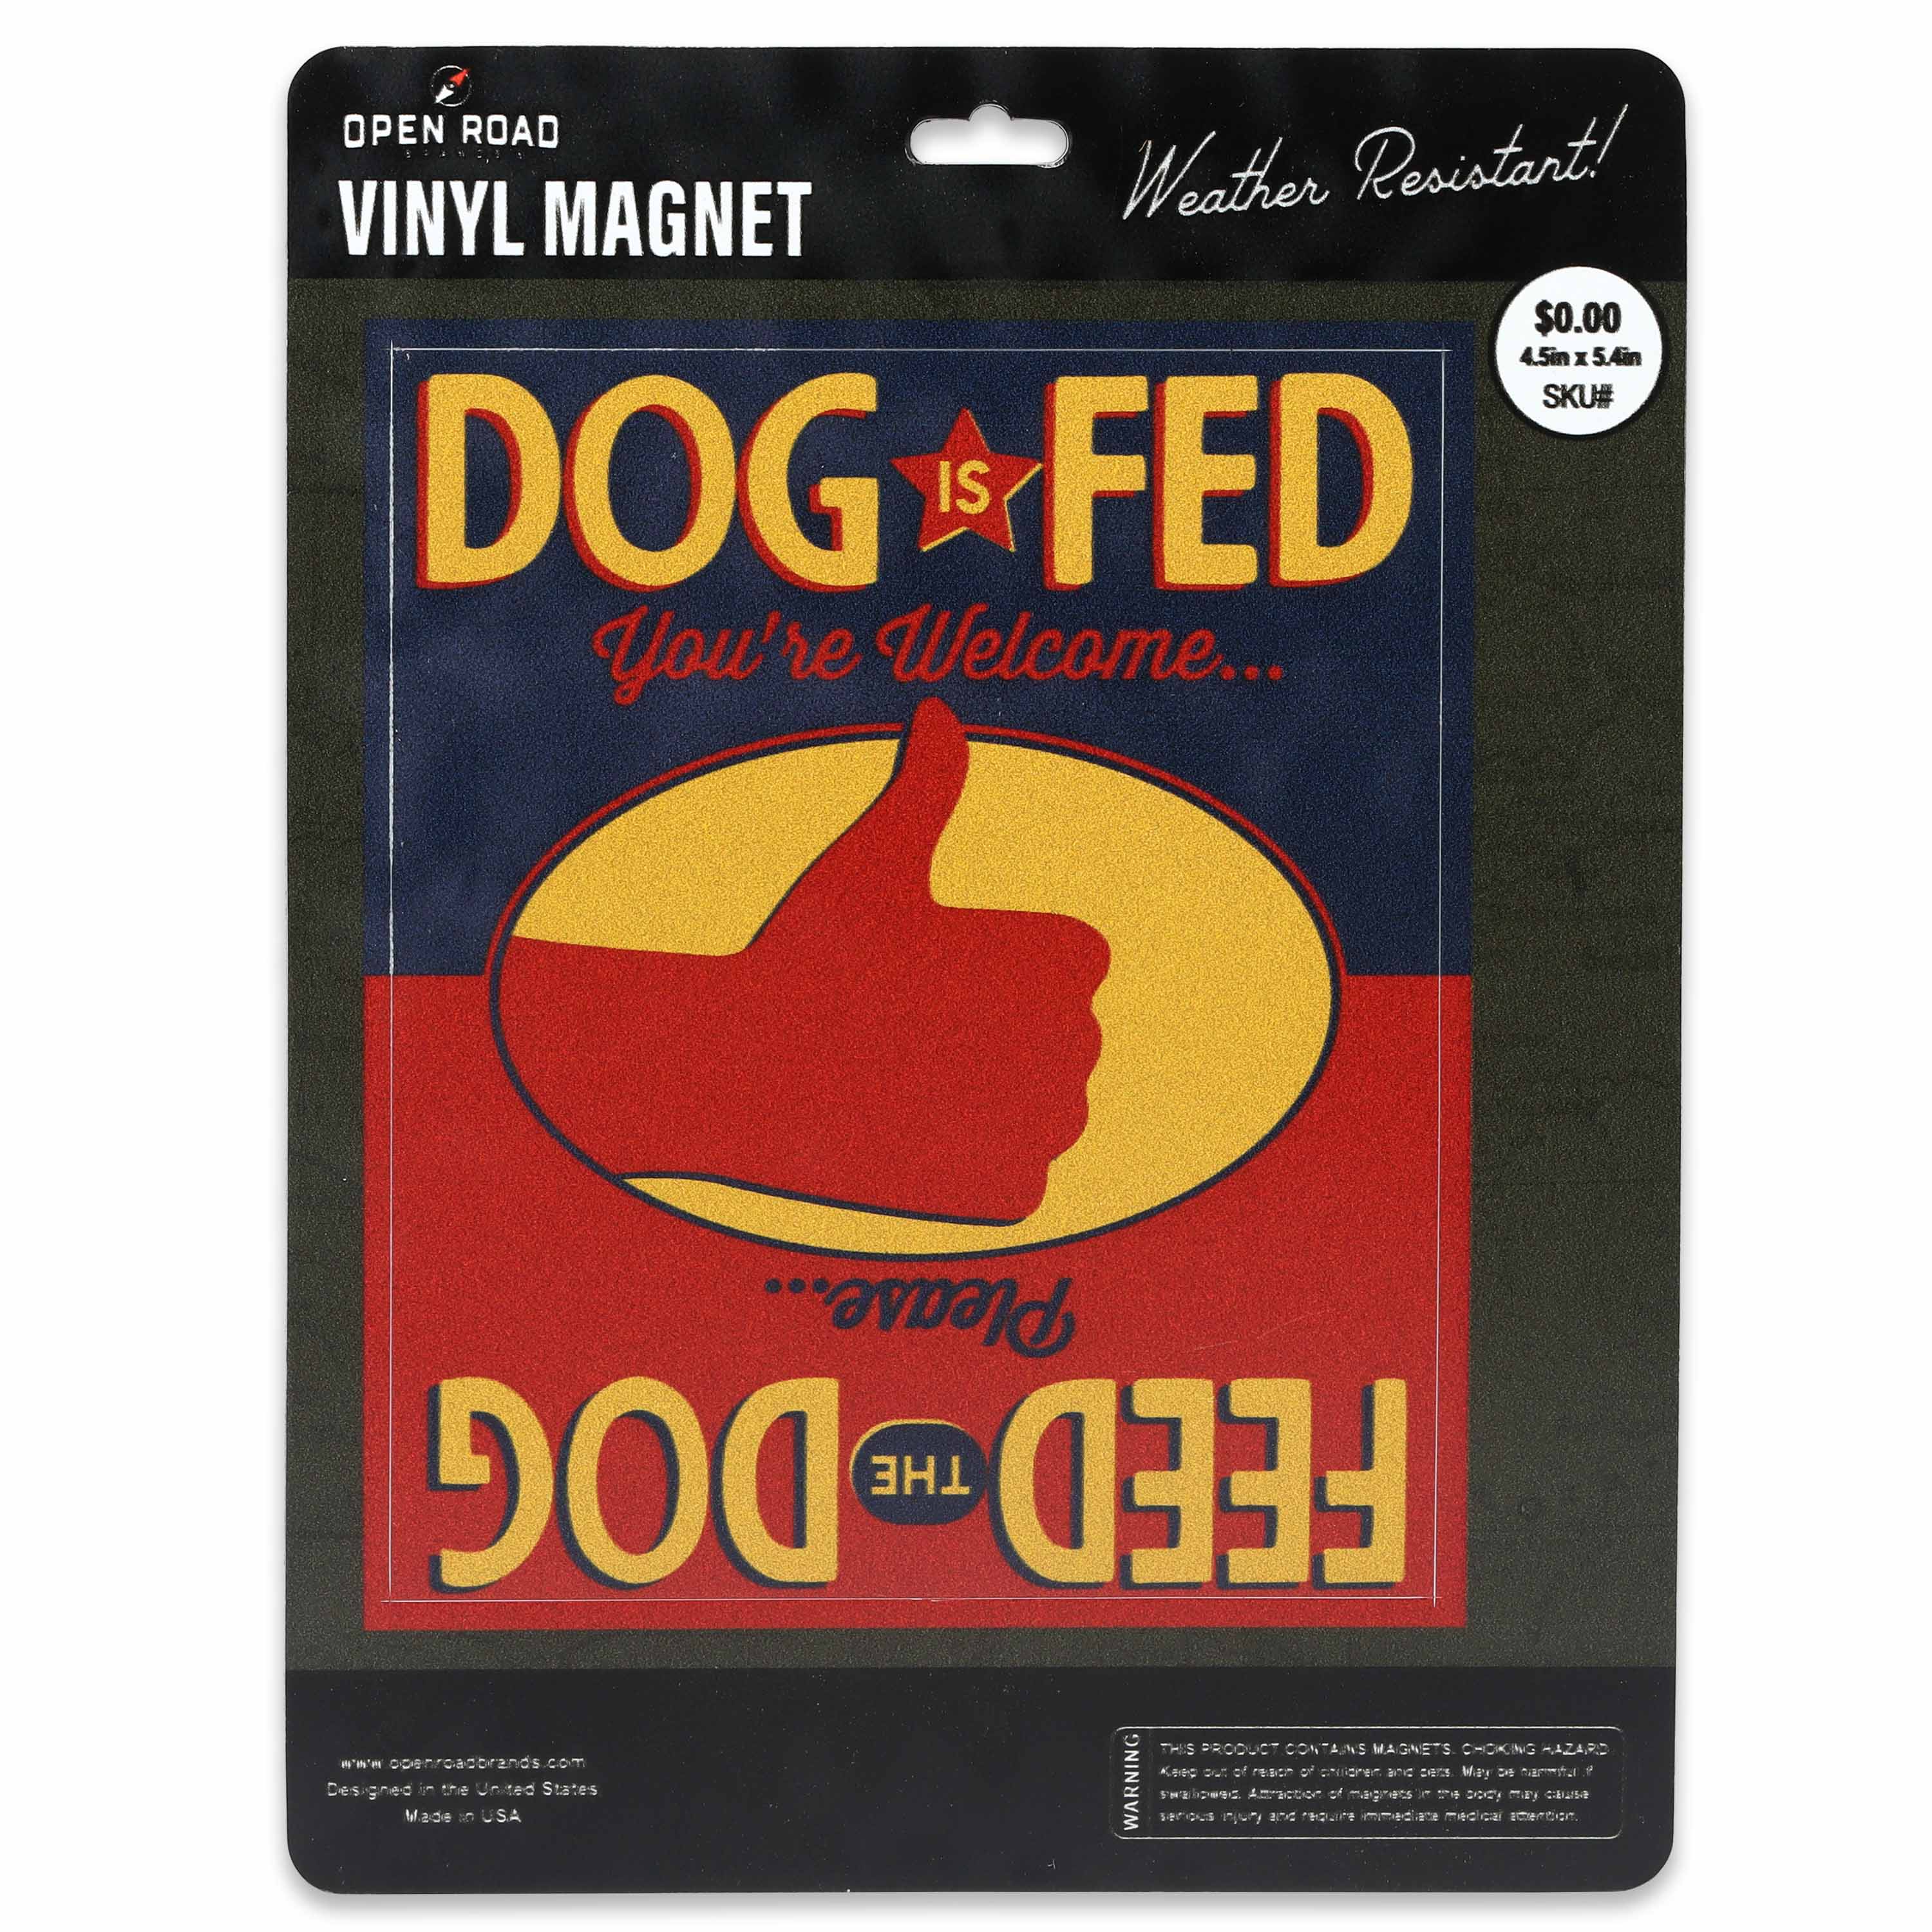 Open Road's Feed the Dog Magnet